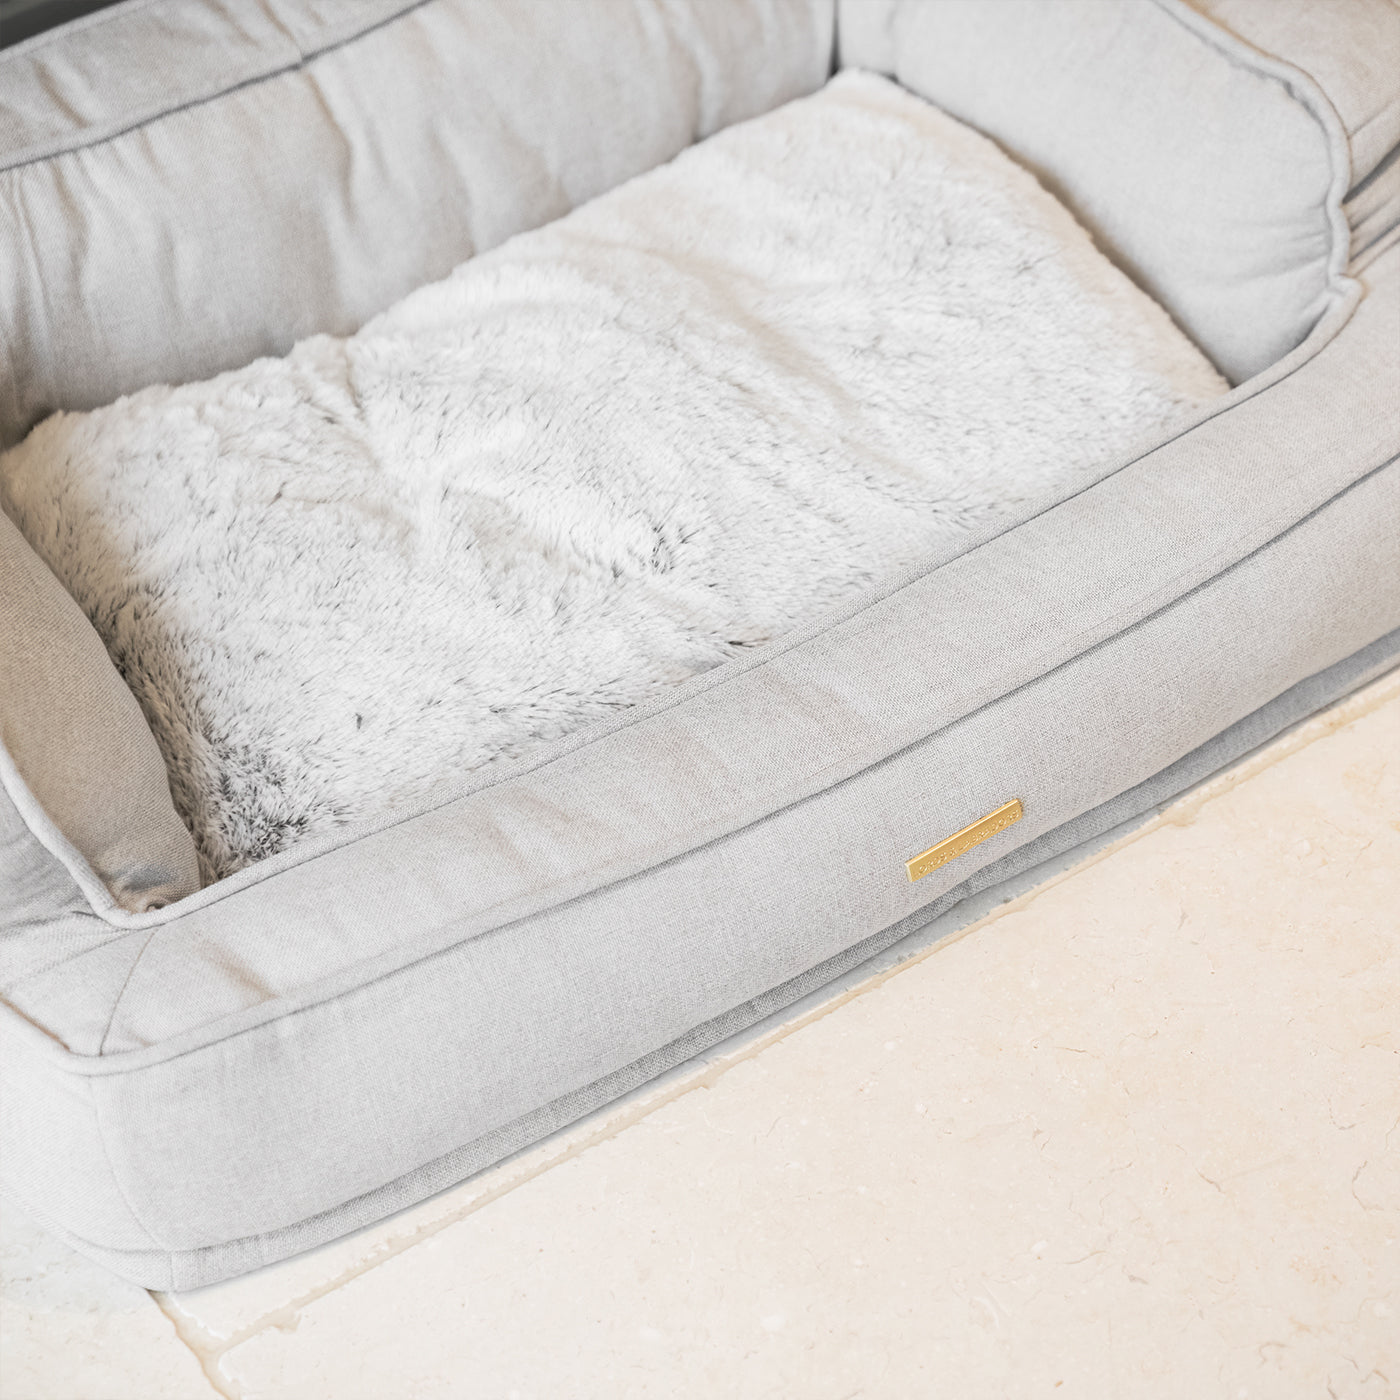 Present Your Furry Friend with the Perfect Dog Bed for The Ultimate Pet Nap-Time! Discover Our Luxury Deep Sleep Dog Bed In Stunning Alabaster! Available Now at Lords & Labradors US